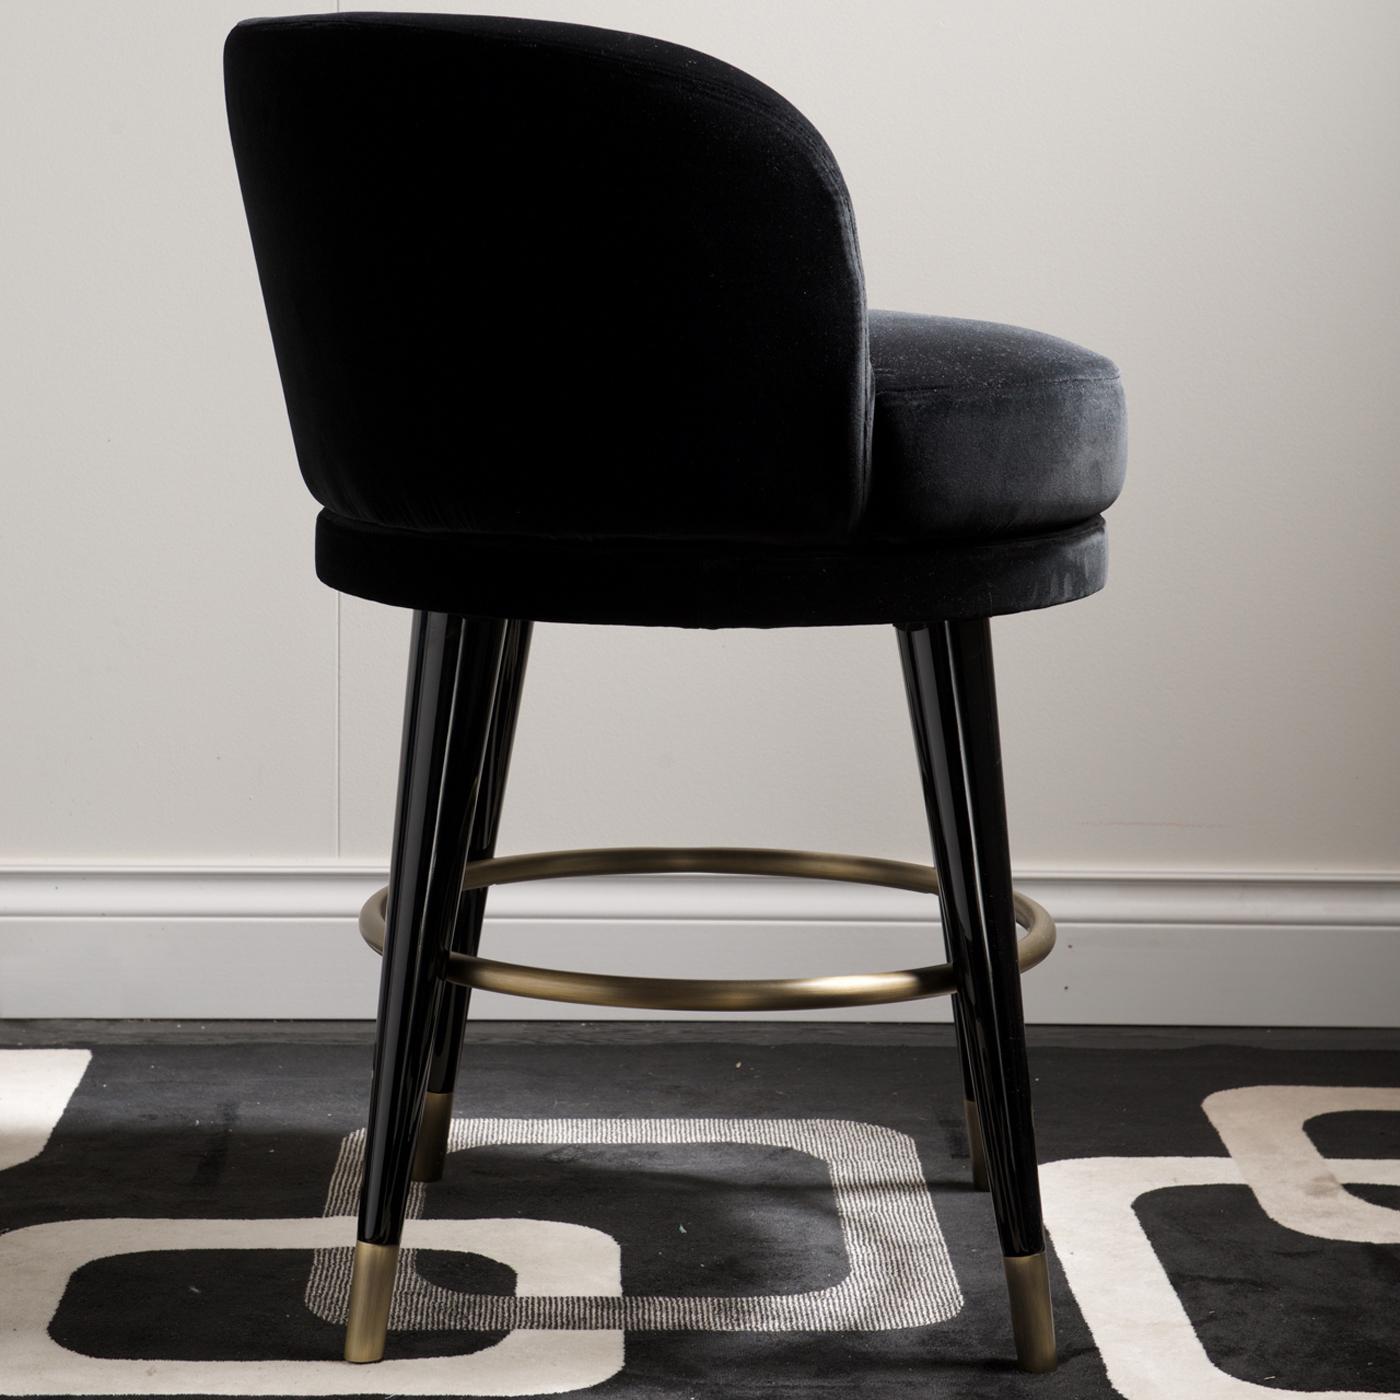 Comfortable yet elegant, the Isidoro bar stool is a must-have in any modern home. Perfect both in the dining room to sit while enjoying drinks with friends during parties, or at the kitchen counter for a casual Sunday brunch, this tall stool is